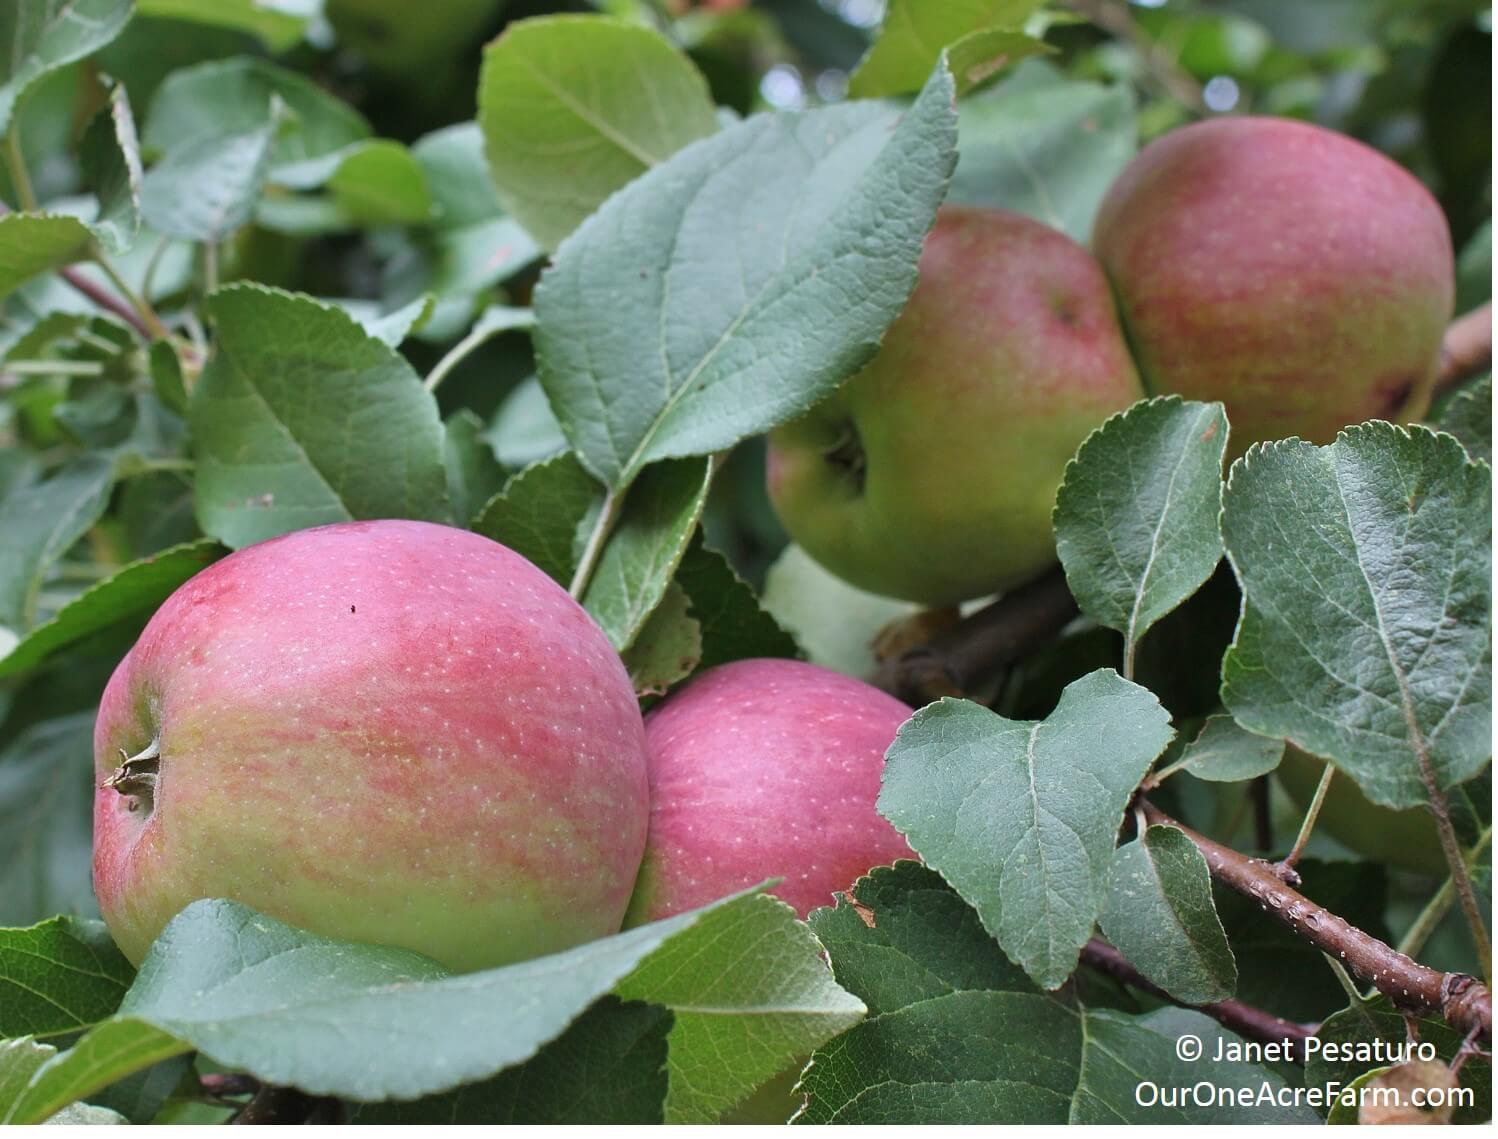 https://ouroneacrefarm.com/wp-content/uploads/2015/08/How-to-Grow-Apples-without-Pesticides-2-tiny.jpg